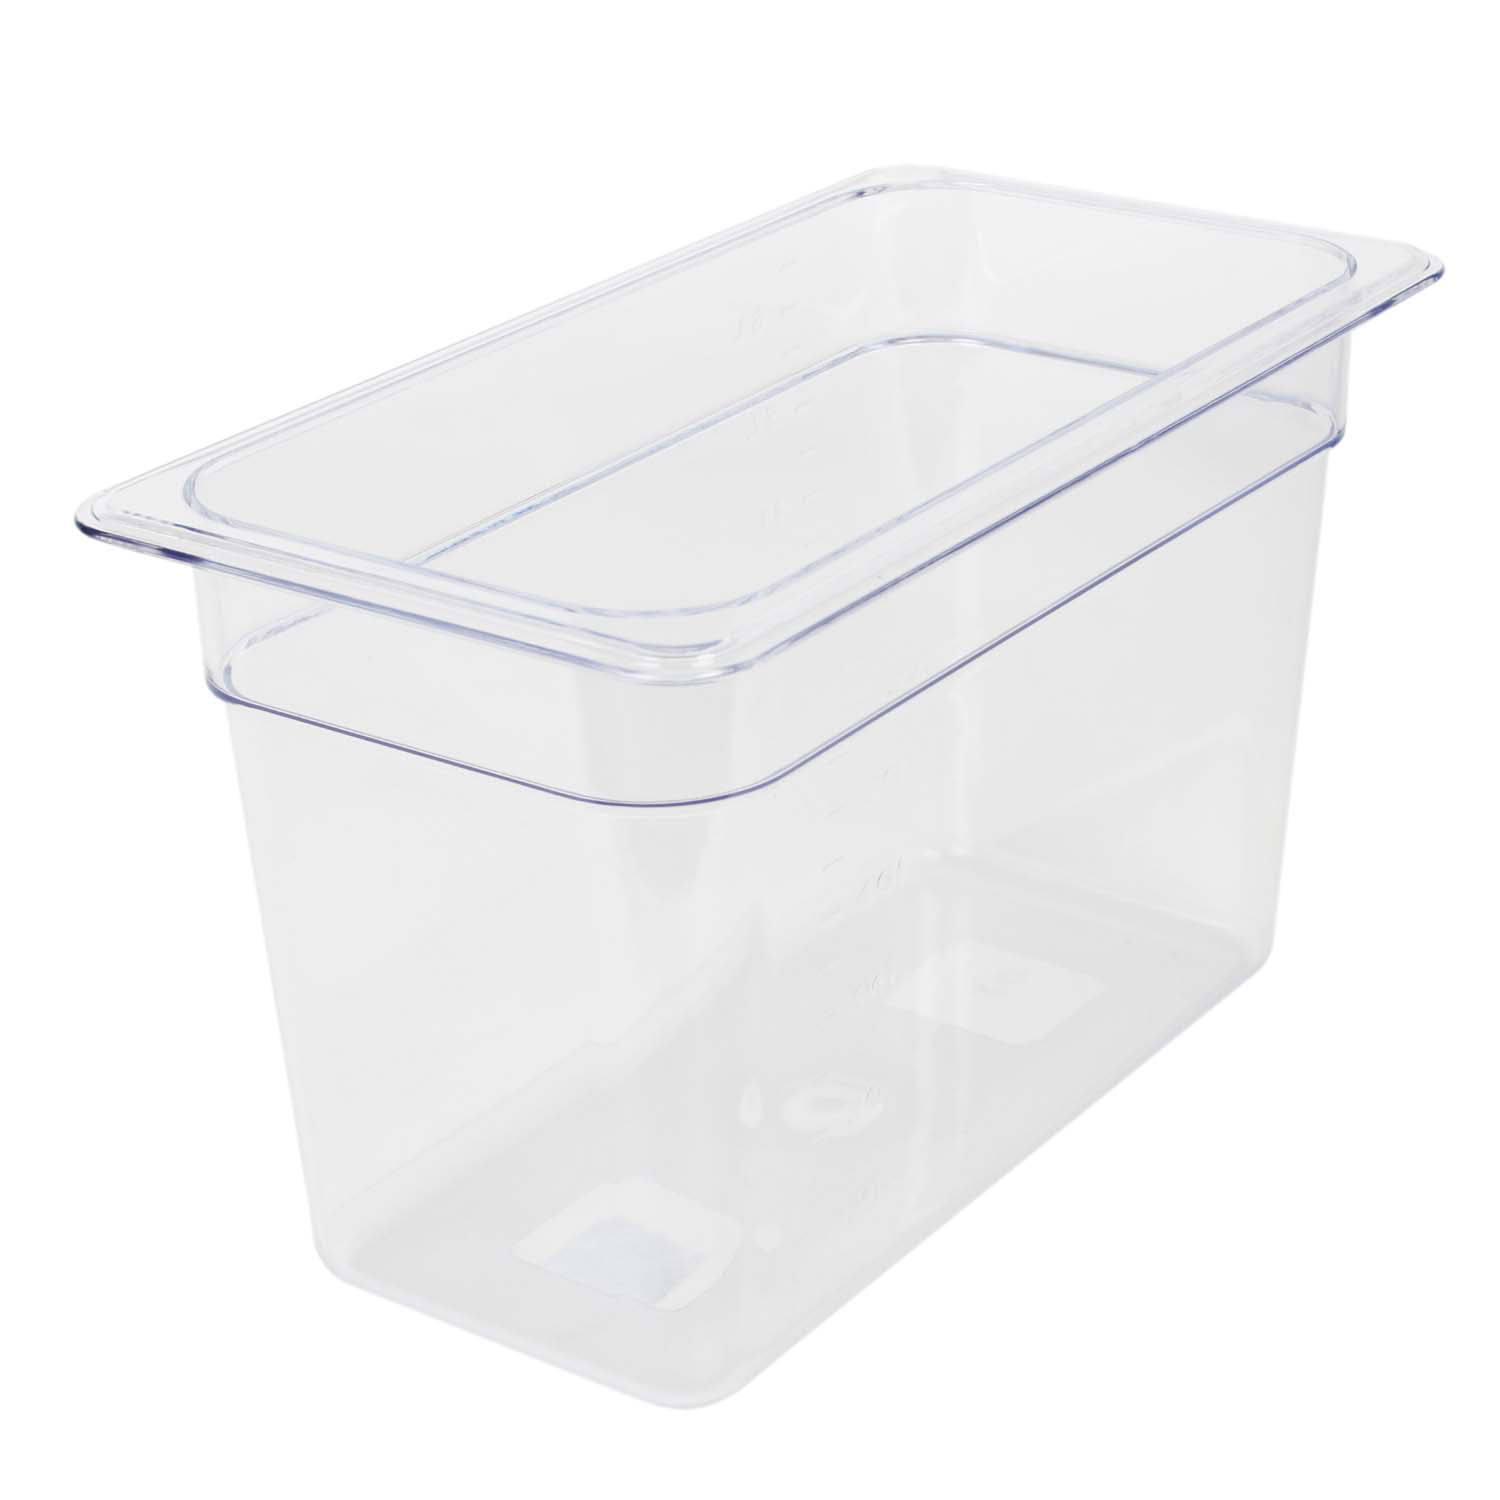 INTBUYING Insulated Food Transport Carrier Expandable Catering Hot Cold  Dish Pan Containers Plates not included